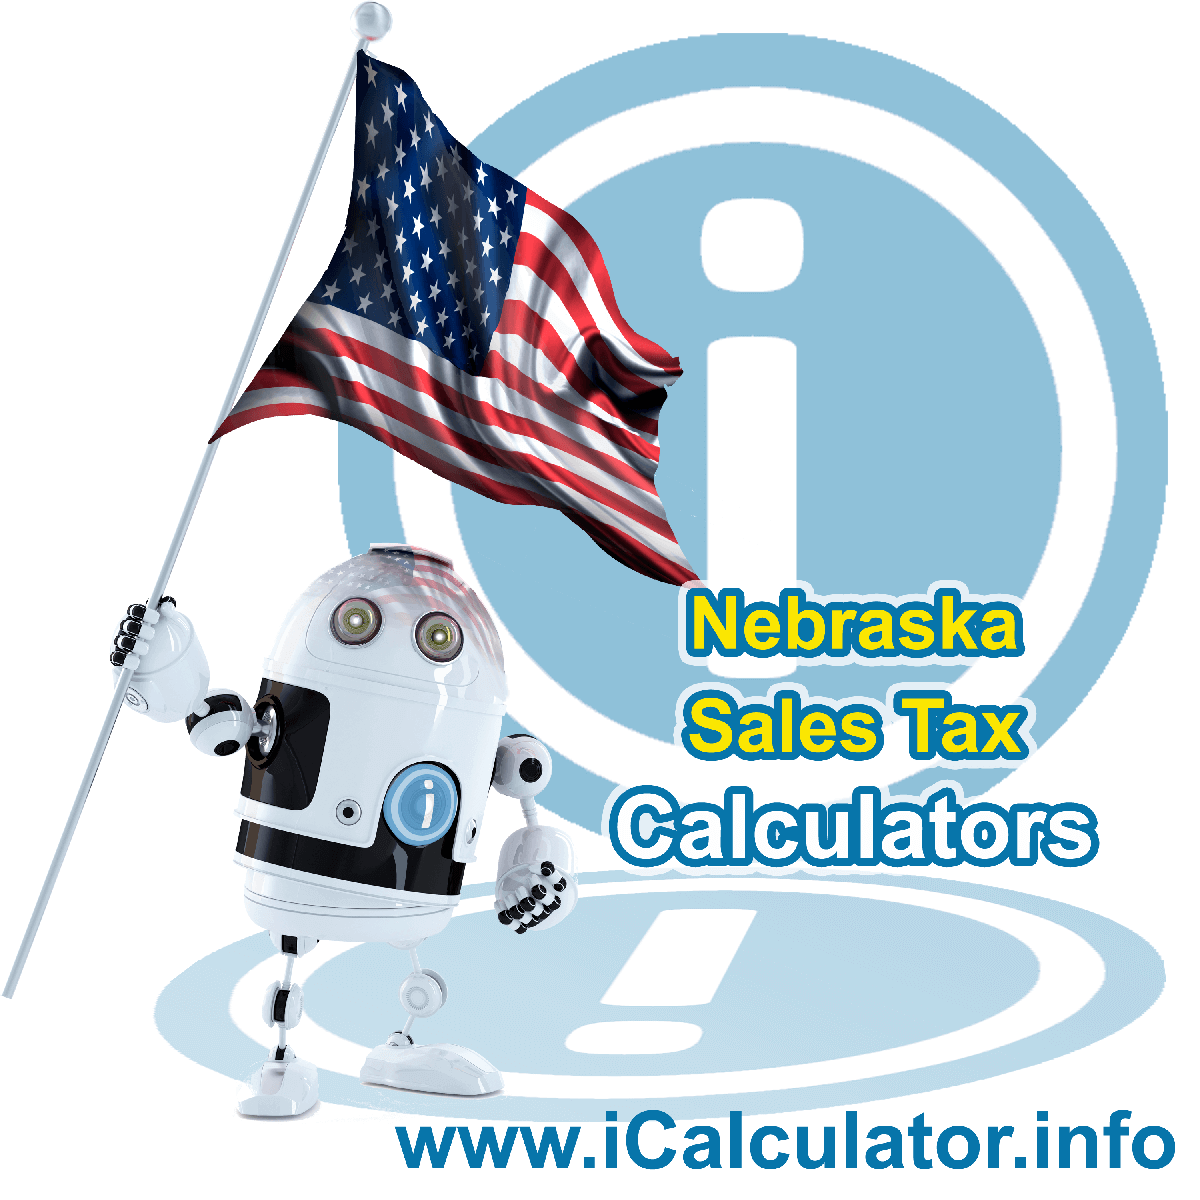 Beaver City Sales Rates: This image illustrates a calculator robot calculating Beaver City sales tax manually using the Beaver City Sales Tax Formula. You can use this information to calculate Beaver City Sales Tax manually or use the Beaver City Sales Tax Calculator to calculate sales tax online.